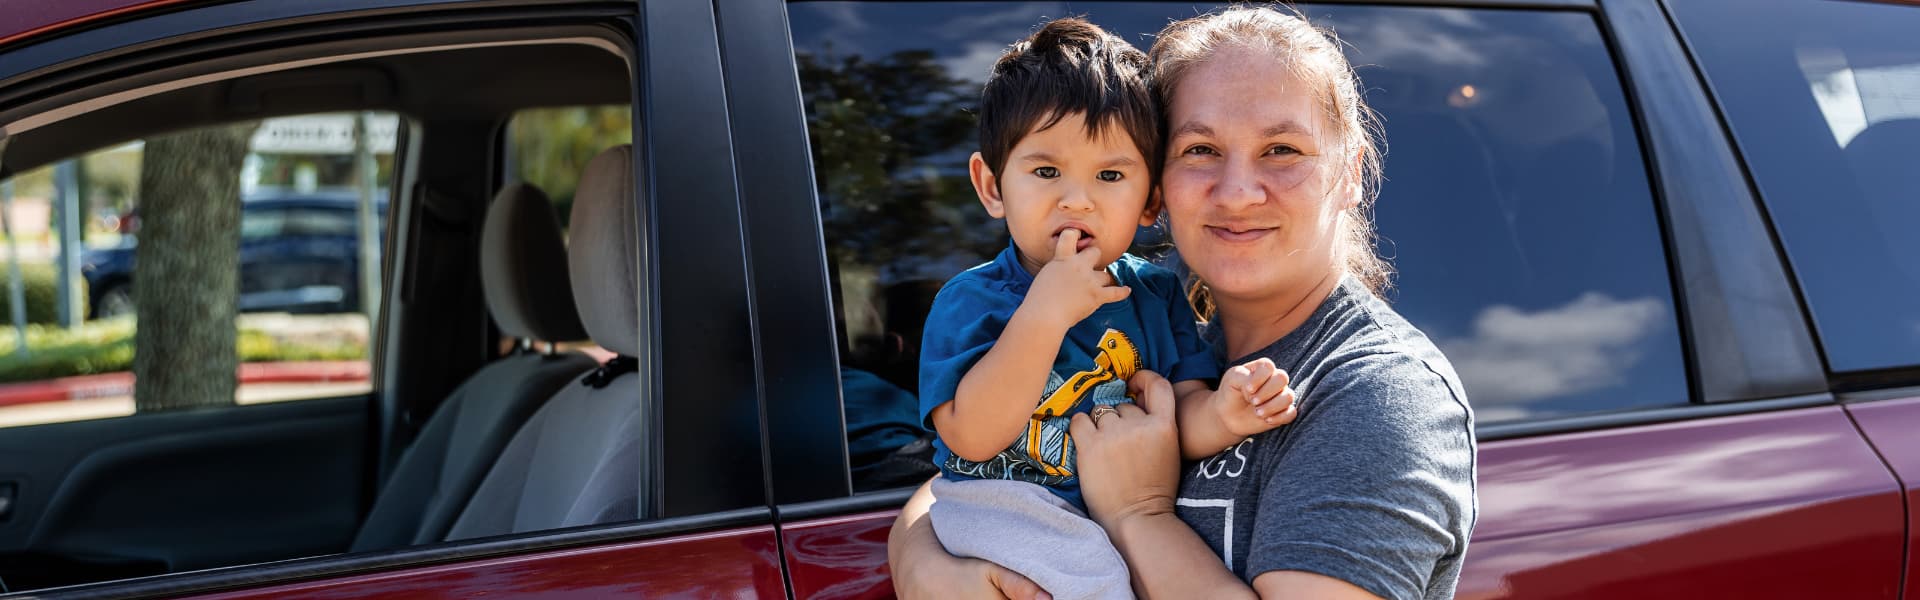 Joyce and her child standing outside in front of a vehicle